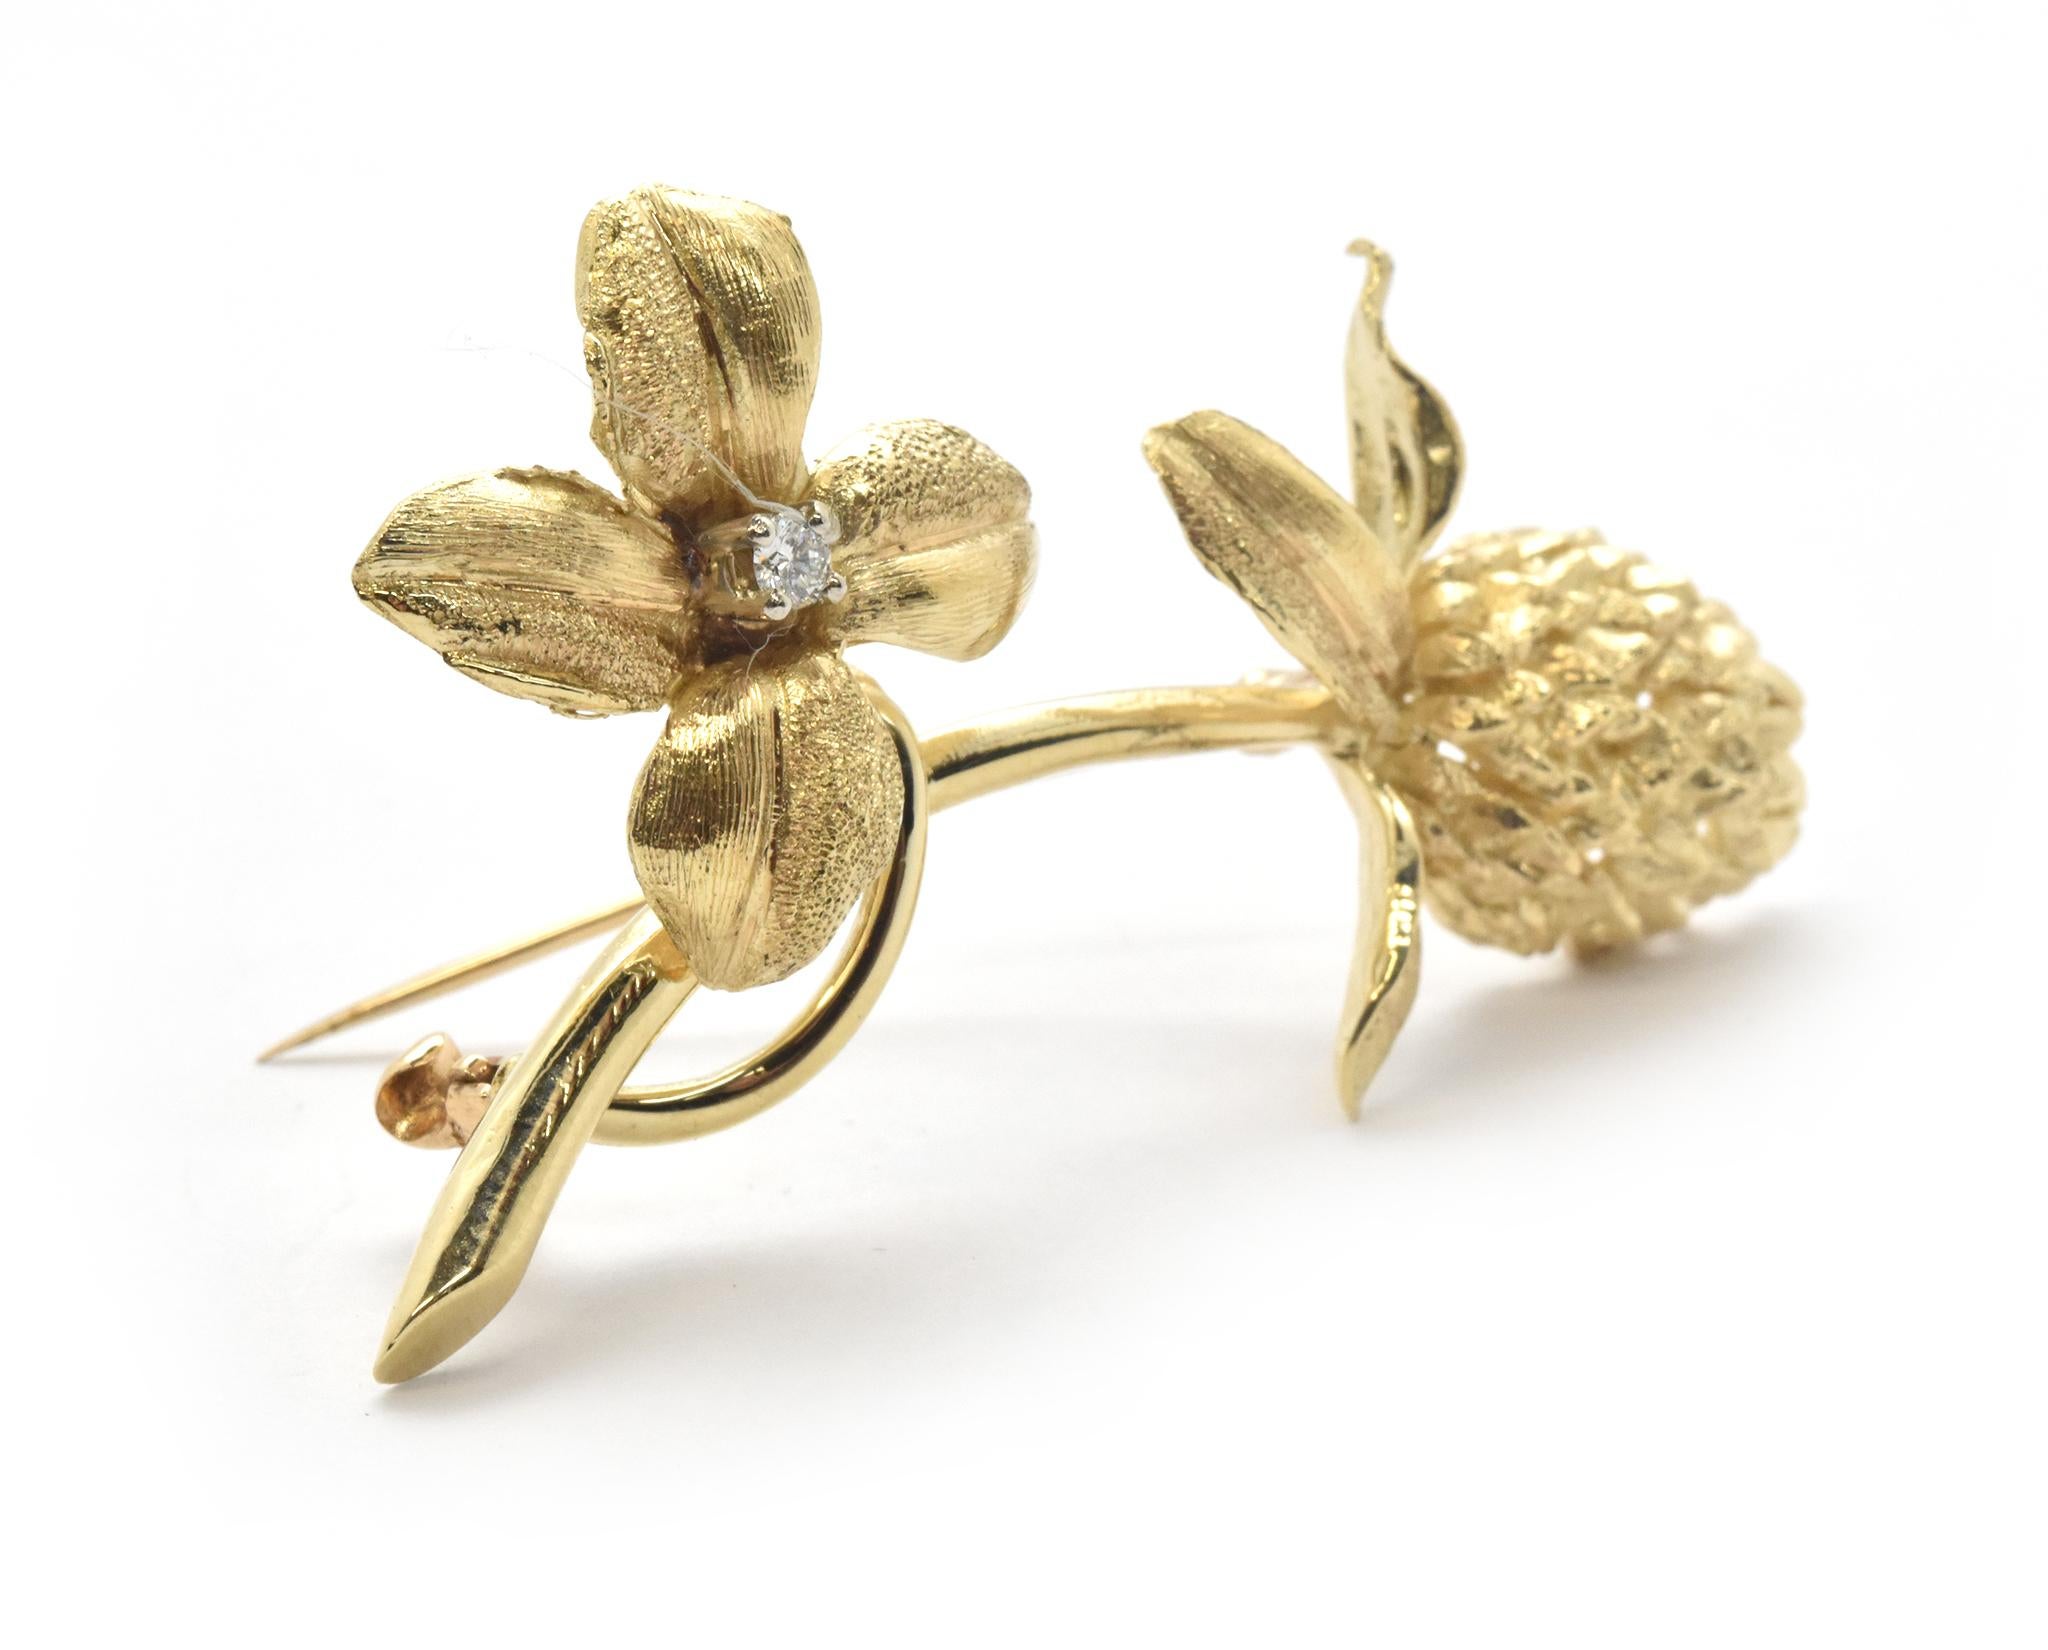 This vintage pin features natural floral designs and aspects designed in 14k yellow gold. One element of the pin is a four-petal flower with a 0.05ct diamond accented center. The balancing element at the end of this pin is a thistle-like floral